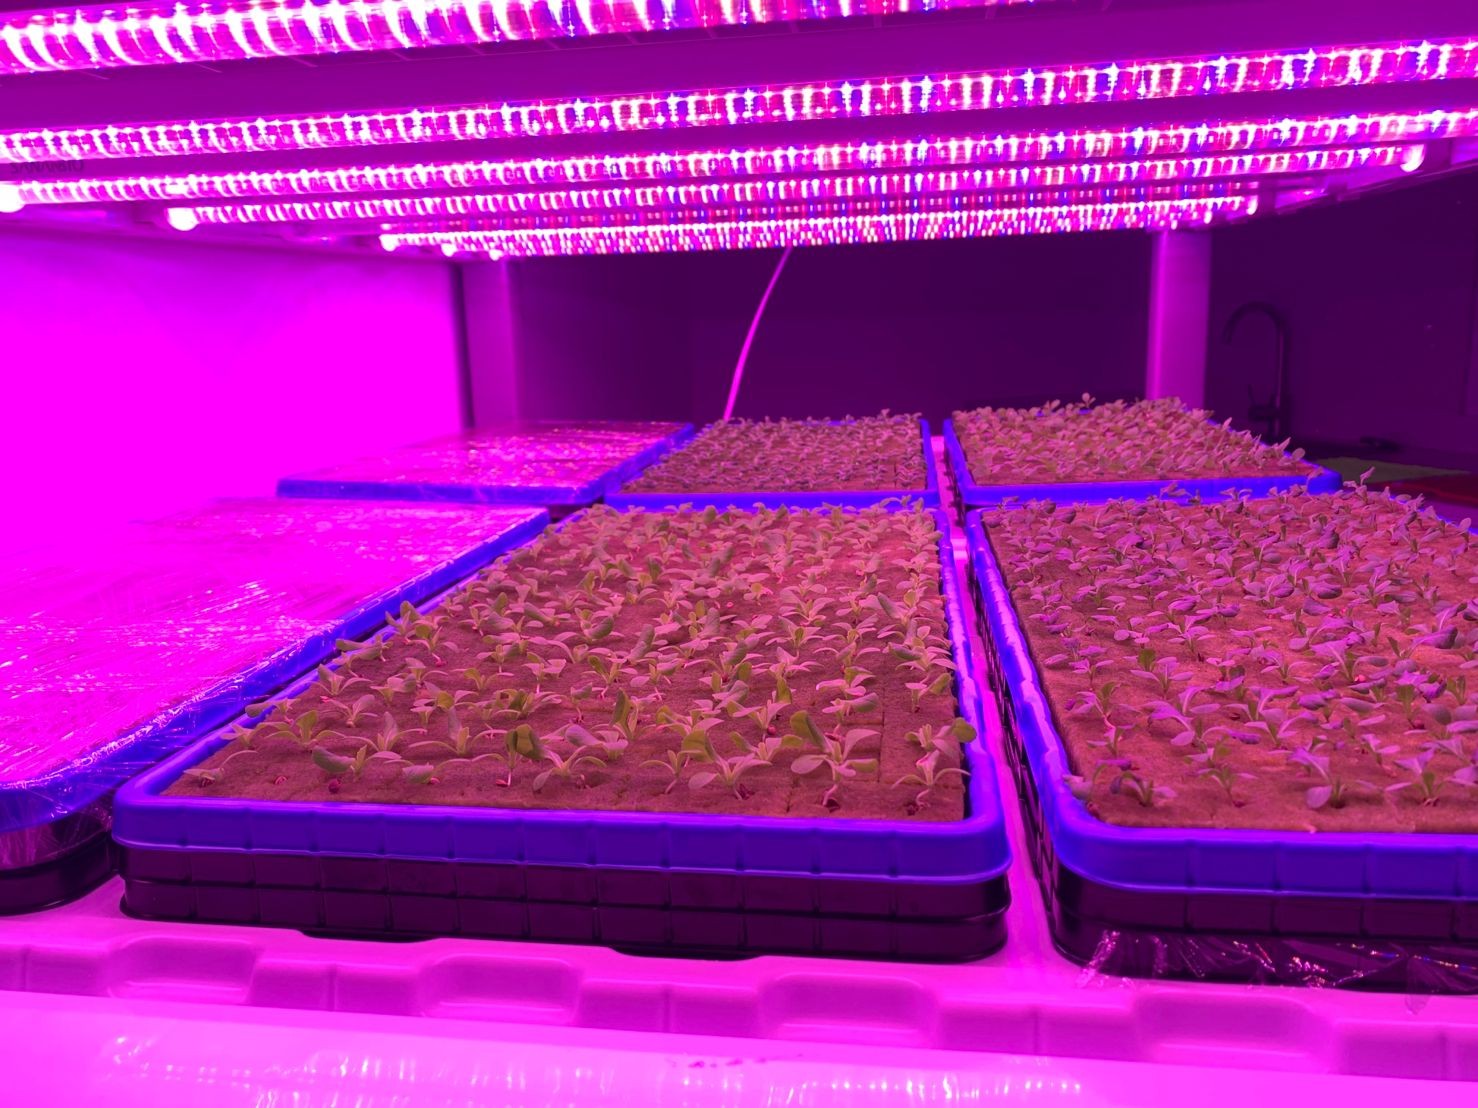 How to Choose Led Grow Lights for Microgreen Growing in Vertical Shelves?